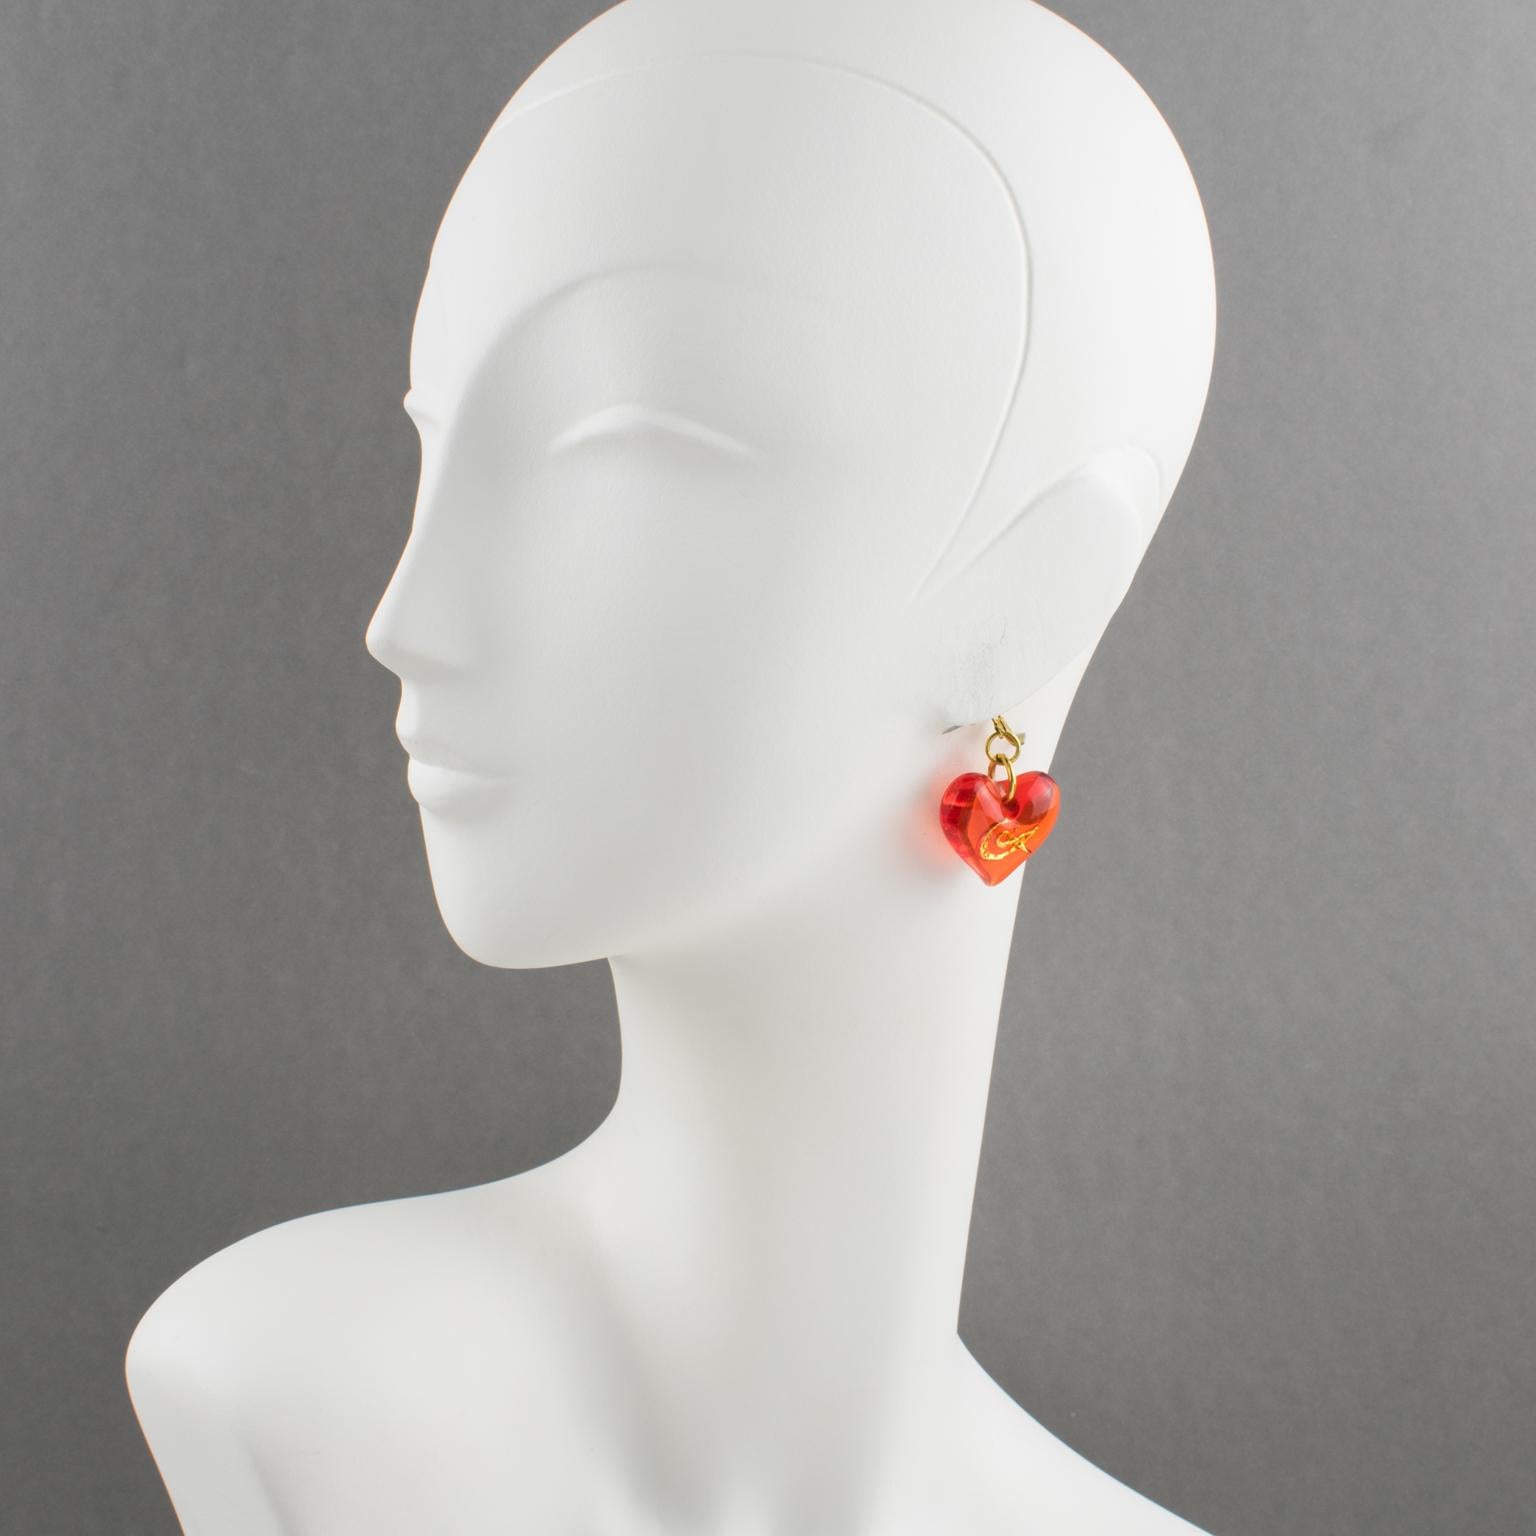 These lovely Christian Lacroix Paris pierced resin earrings feature a dimensional dangling heart shape in transparent neon orange color embellished with a gilt metal 